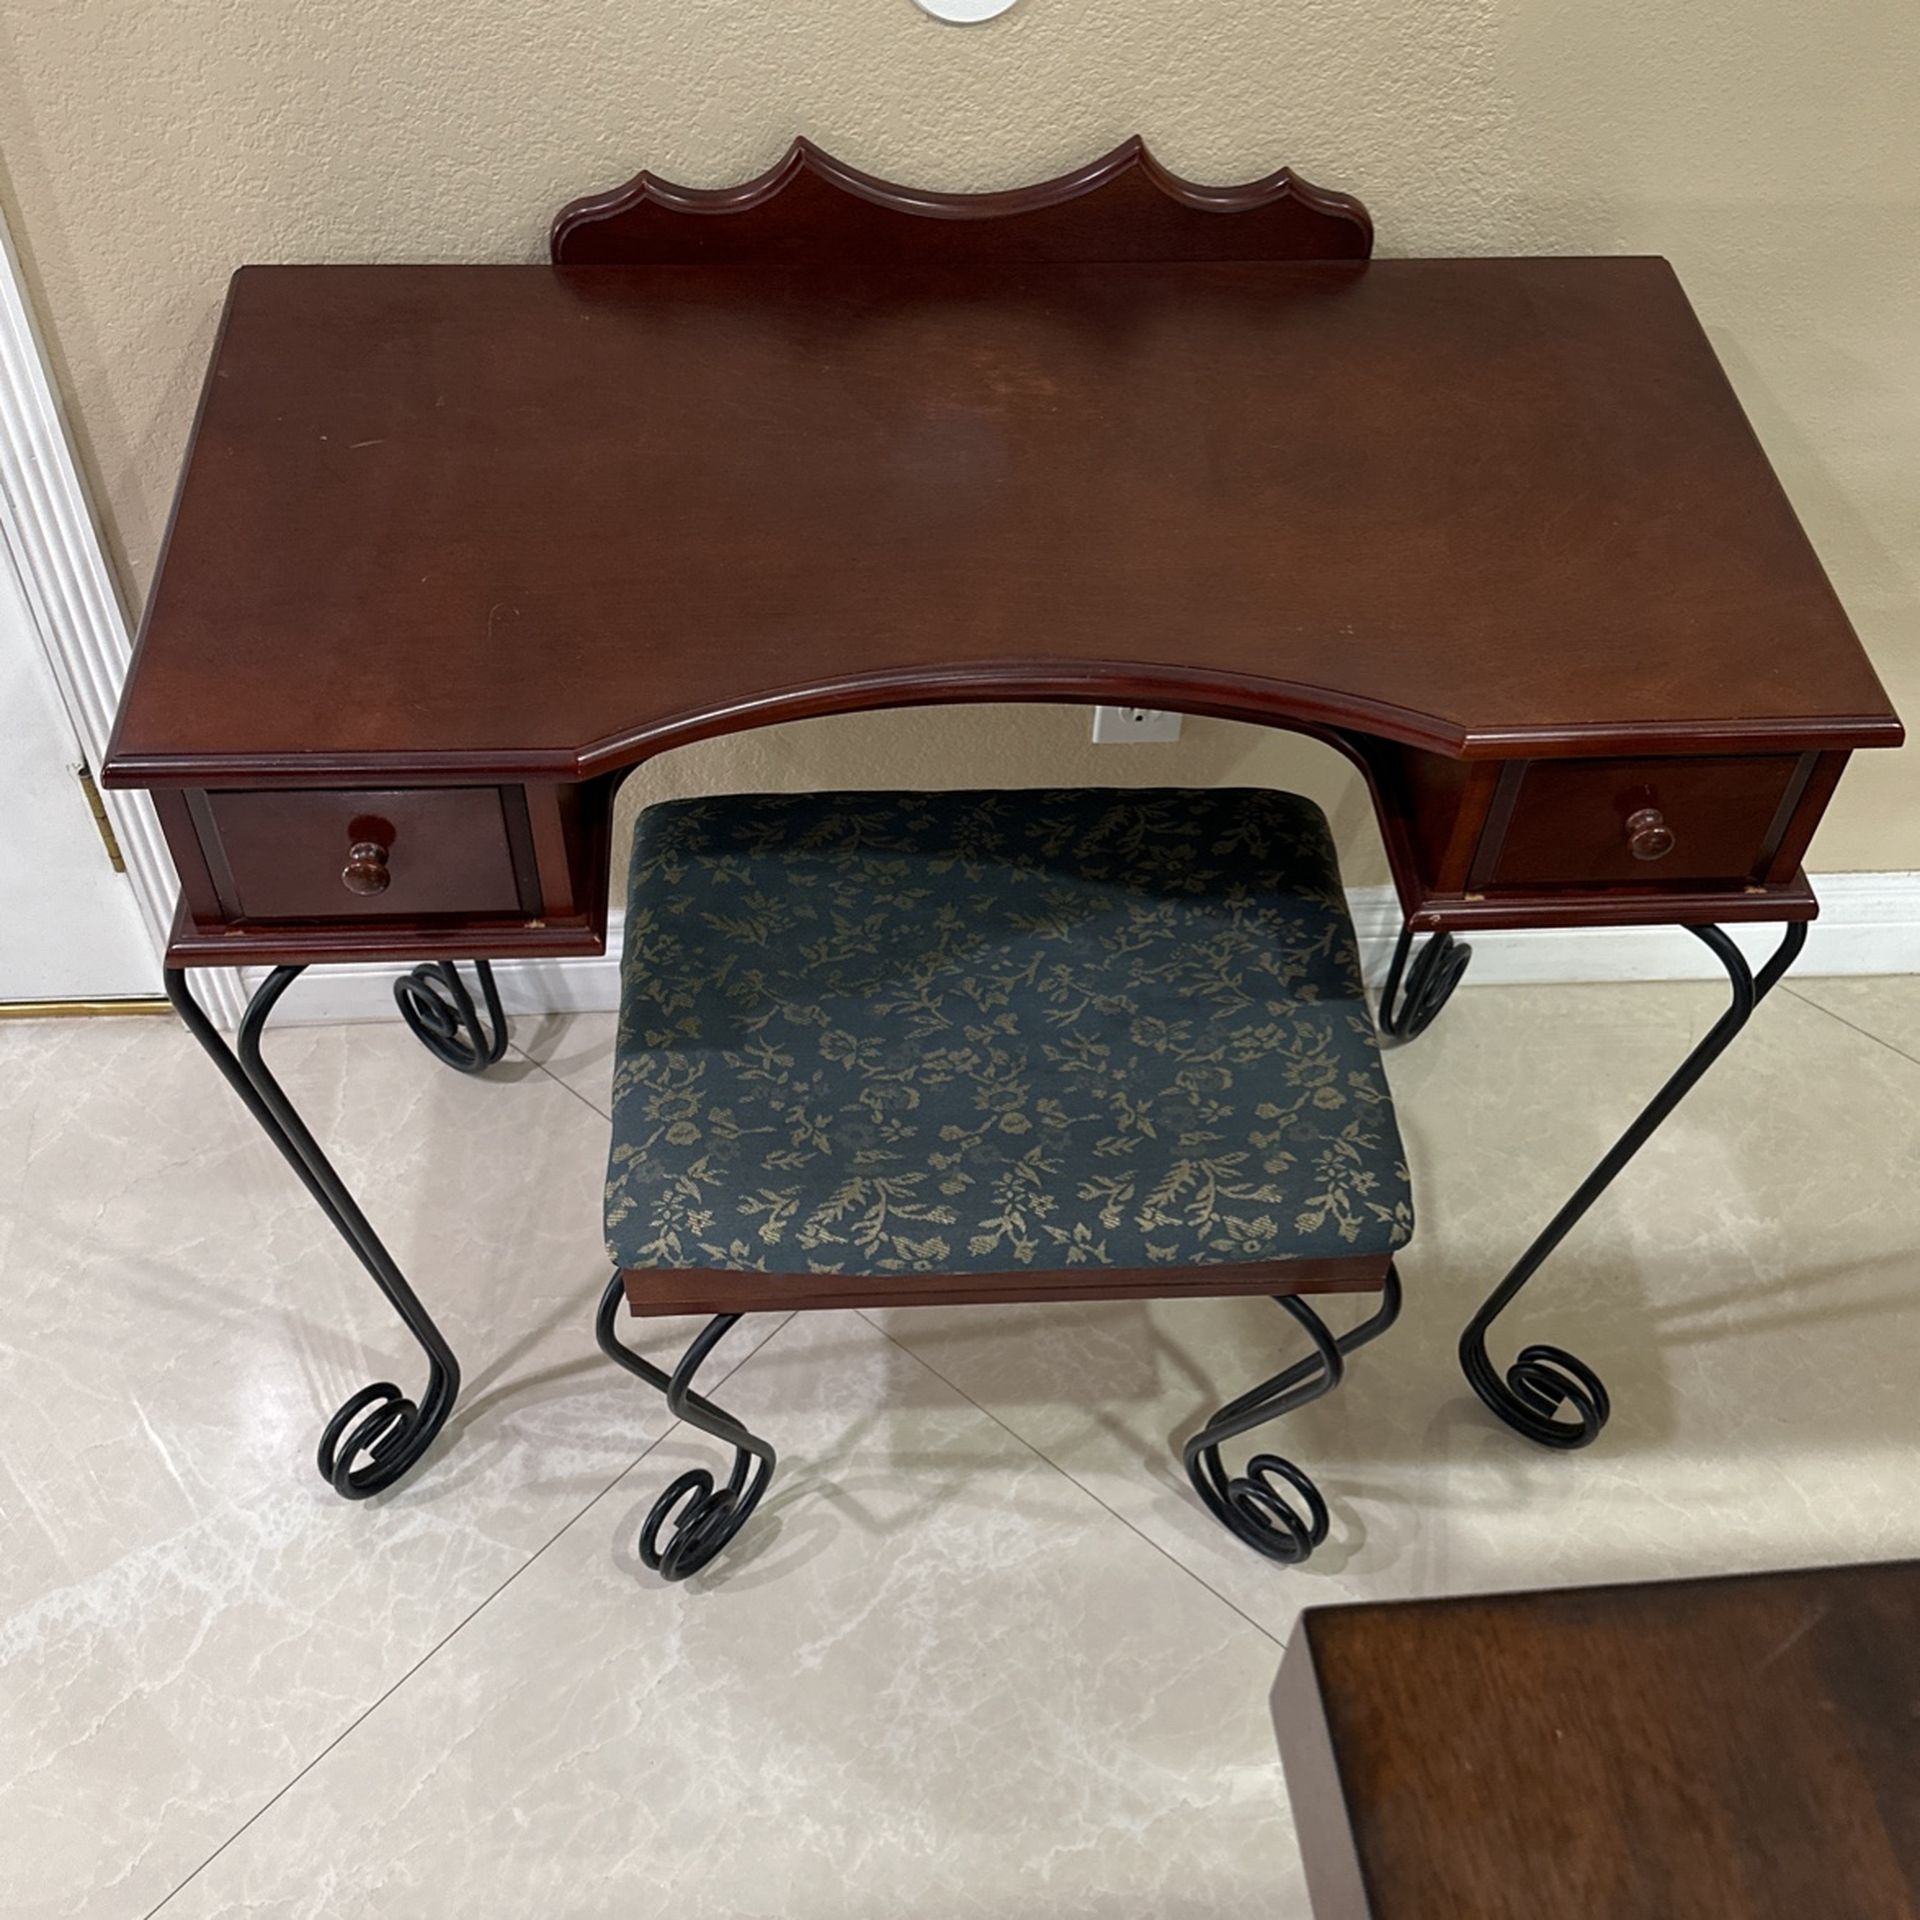 Antique Desk Vanity Table Wood And Iron With stool Chair